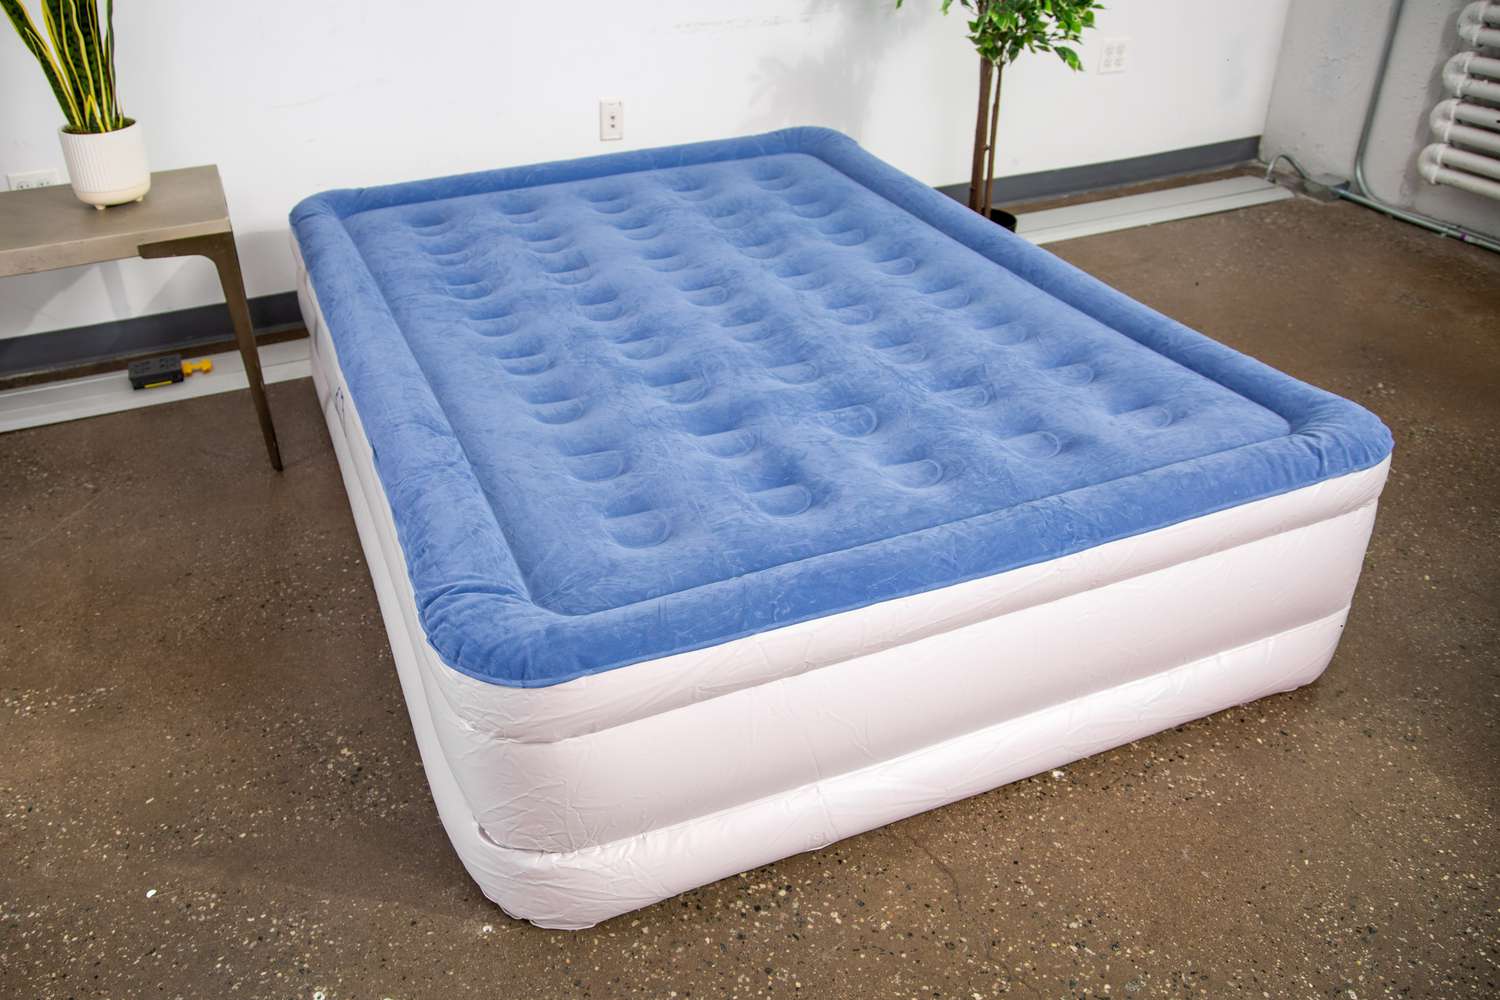 Airbed Mattress Bed Sheet Foam Topper For Air Beds Fit Double Queen W/ Carry Bag 